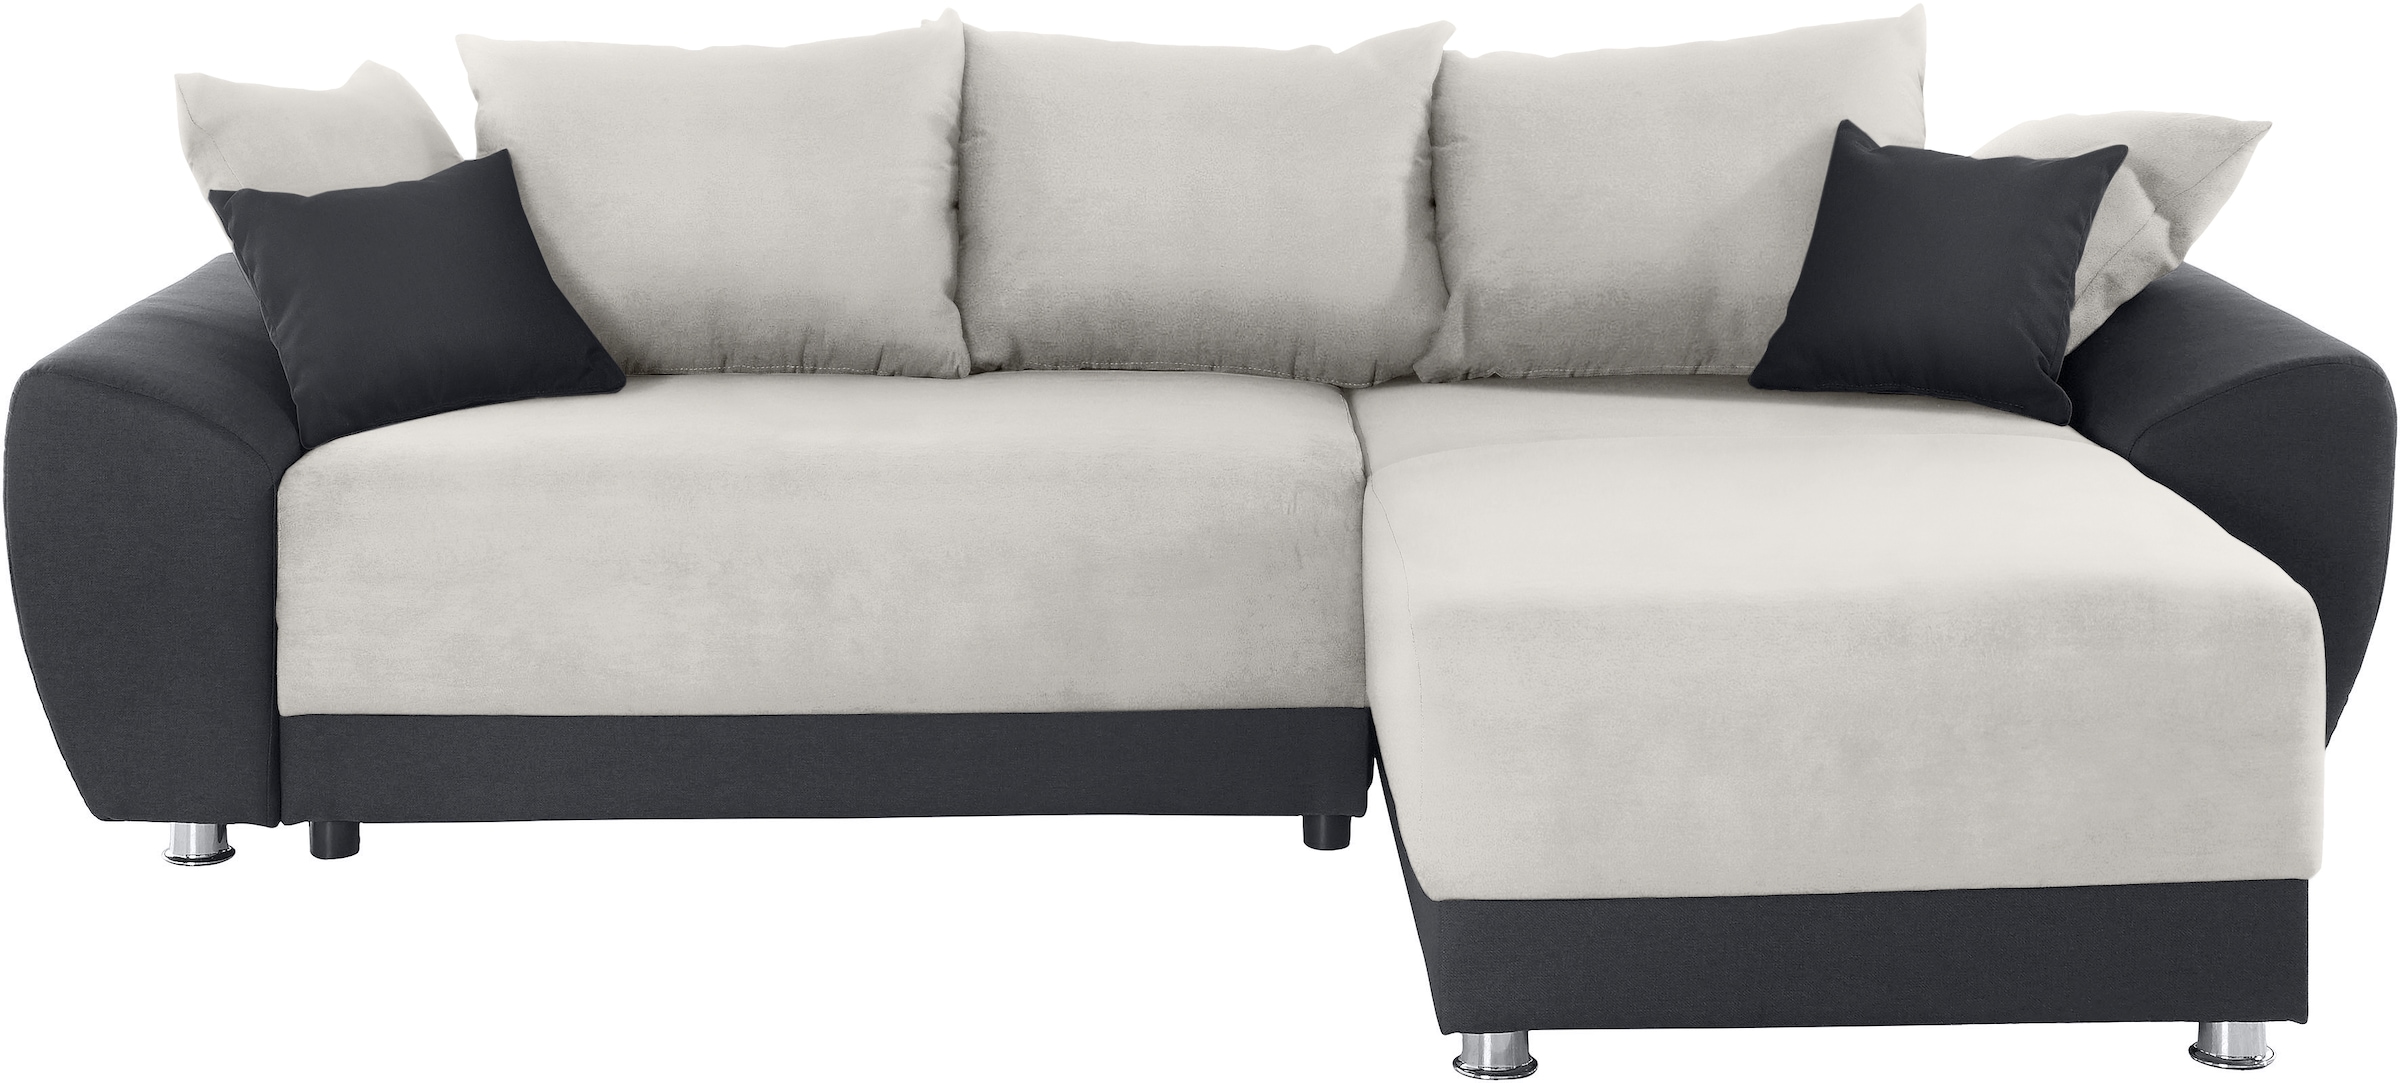 COLLECTION AB Ecksofa »Riviera L-Form«, LED-RGB-Beleuchtung